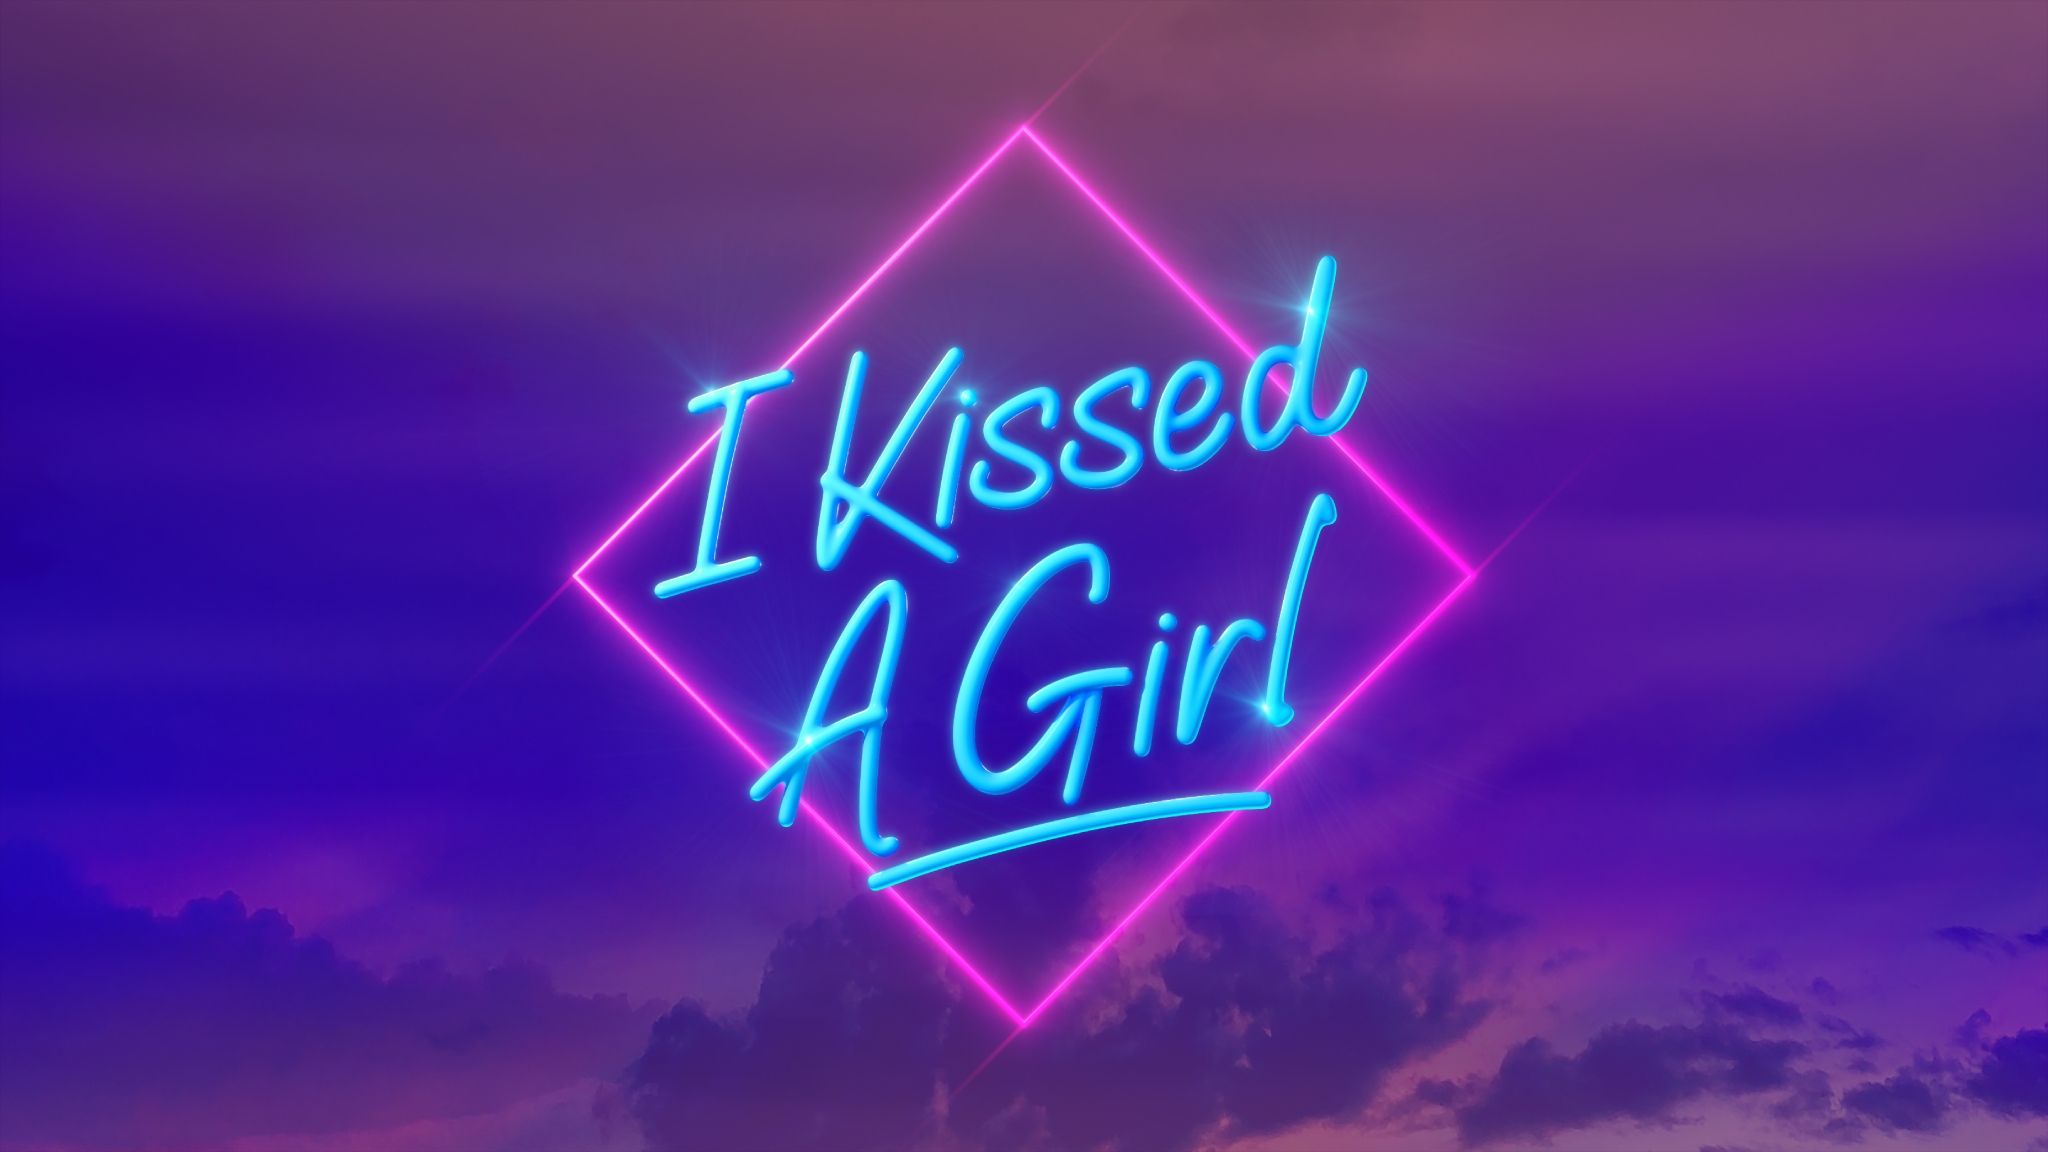 A purple and blue neon sign that says 